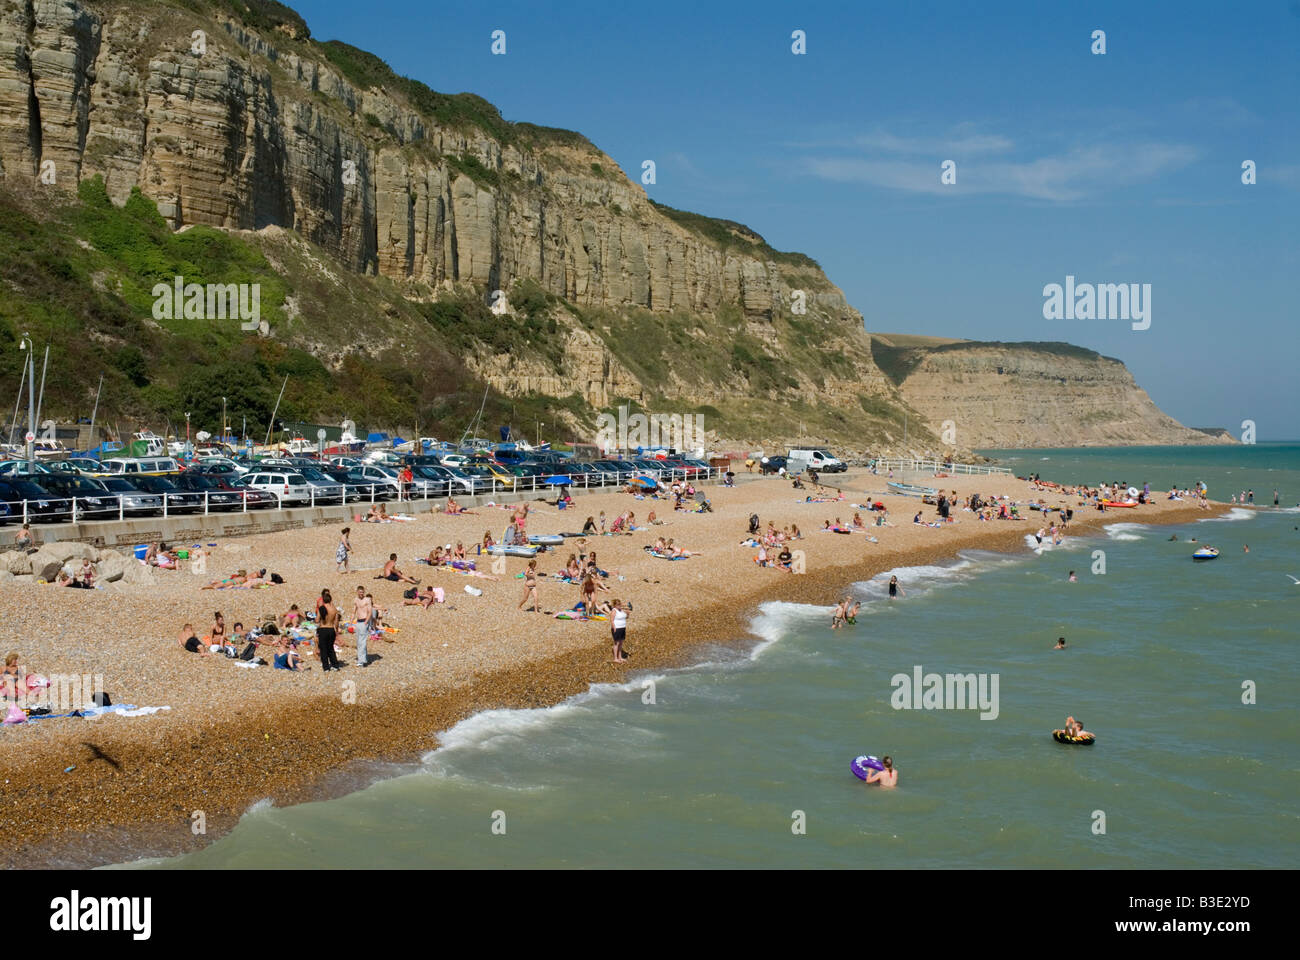 Beach and cliffs in Hastings Country Park Hastings East Sussex UK Stock Photo